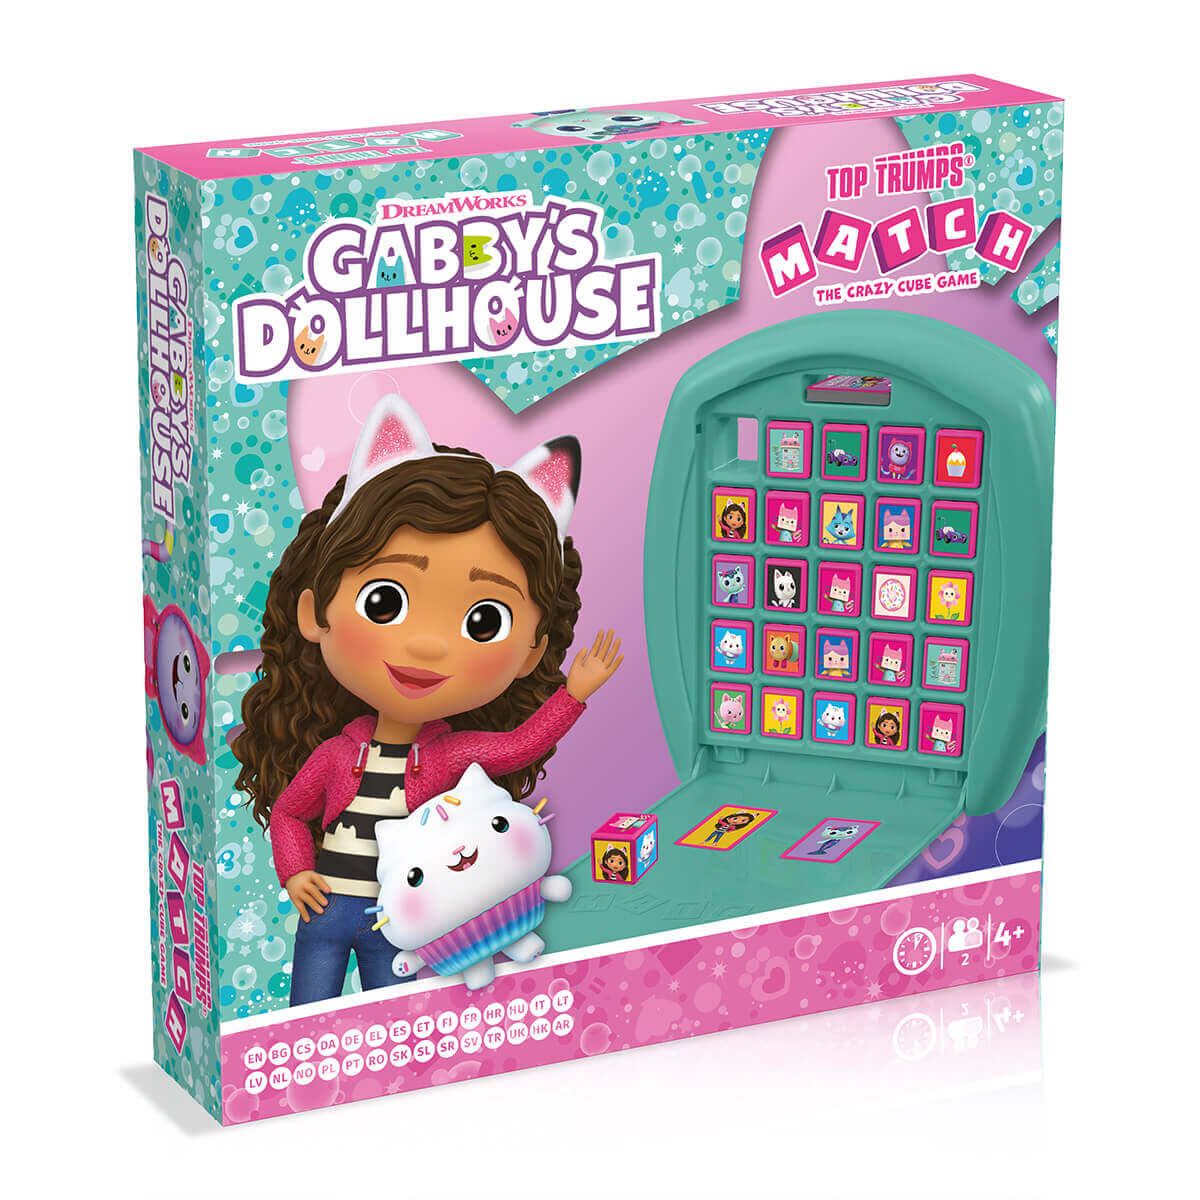 Gabby's Dollhouse Top Trumps Match - The Crazy Cube Game